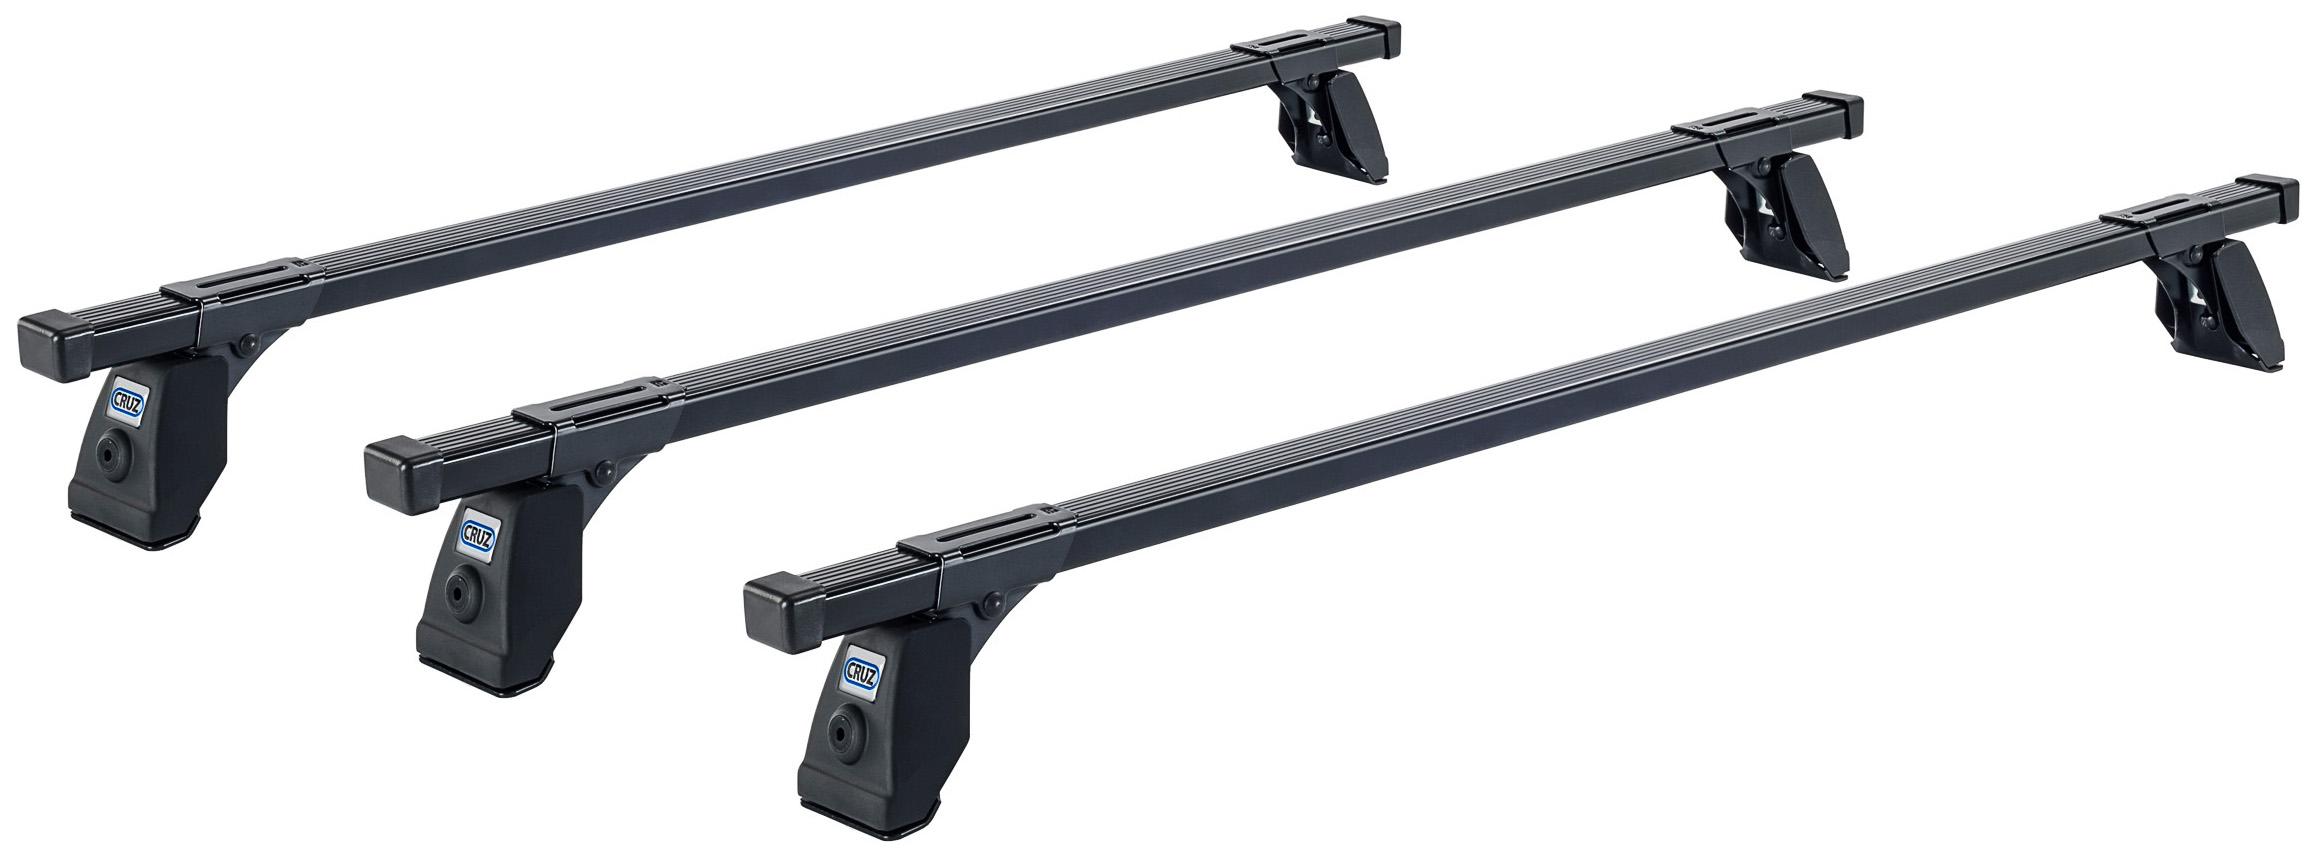 Cruz Commercial Roof Bars 30 X 20 922-433 - Pack Of 2